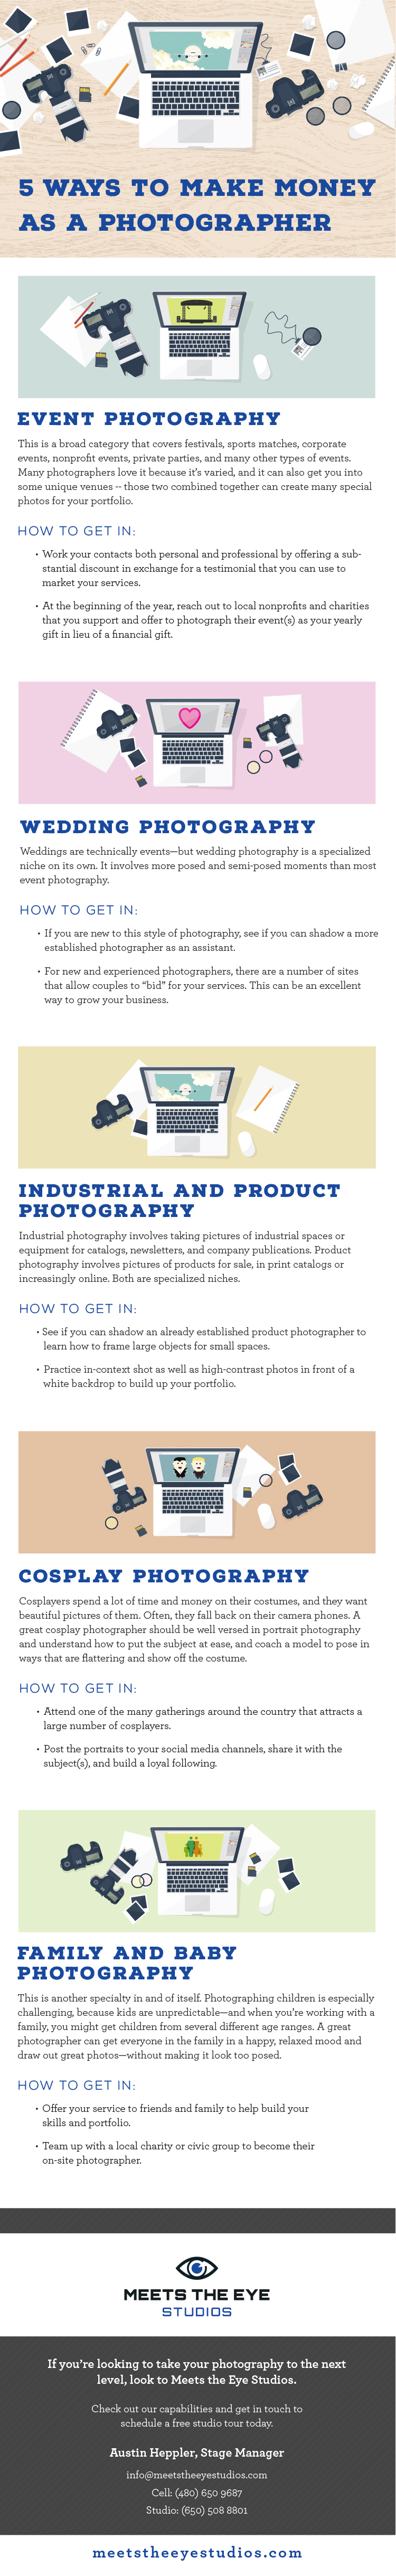 5 Ways to Make Money as a Photographer